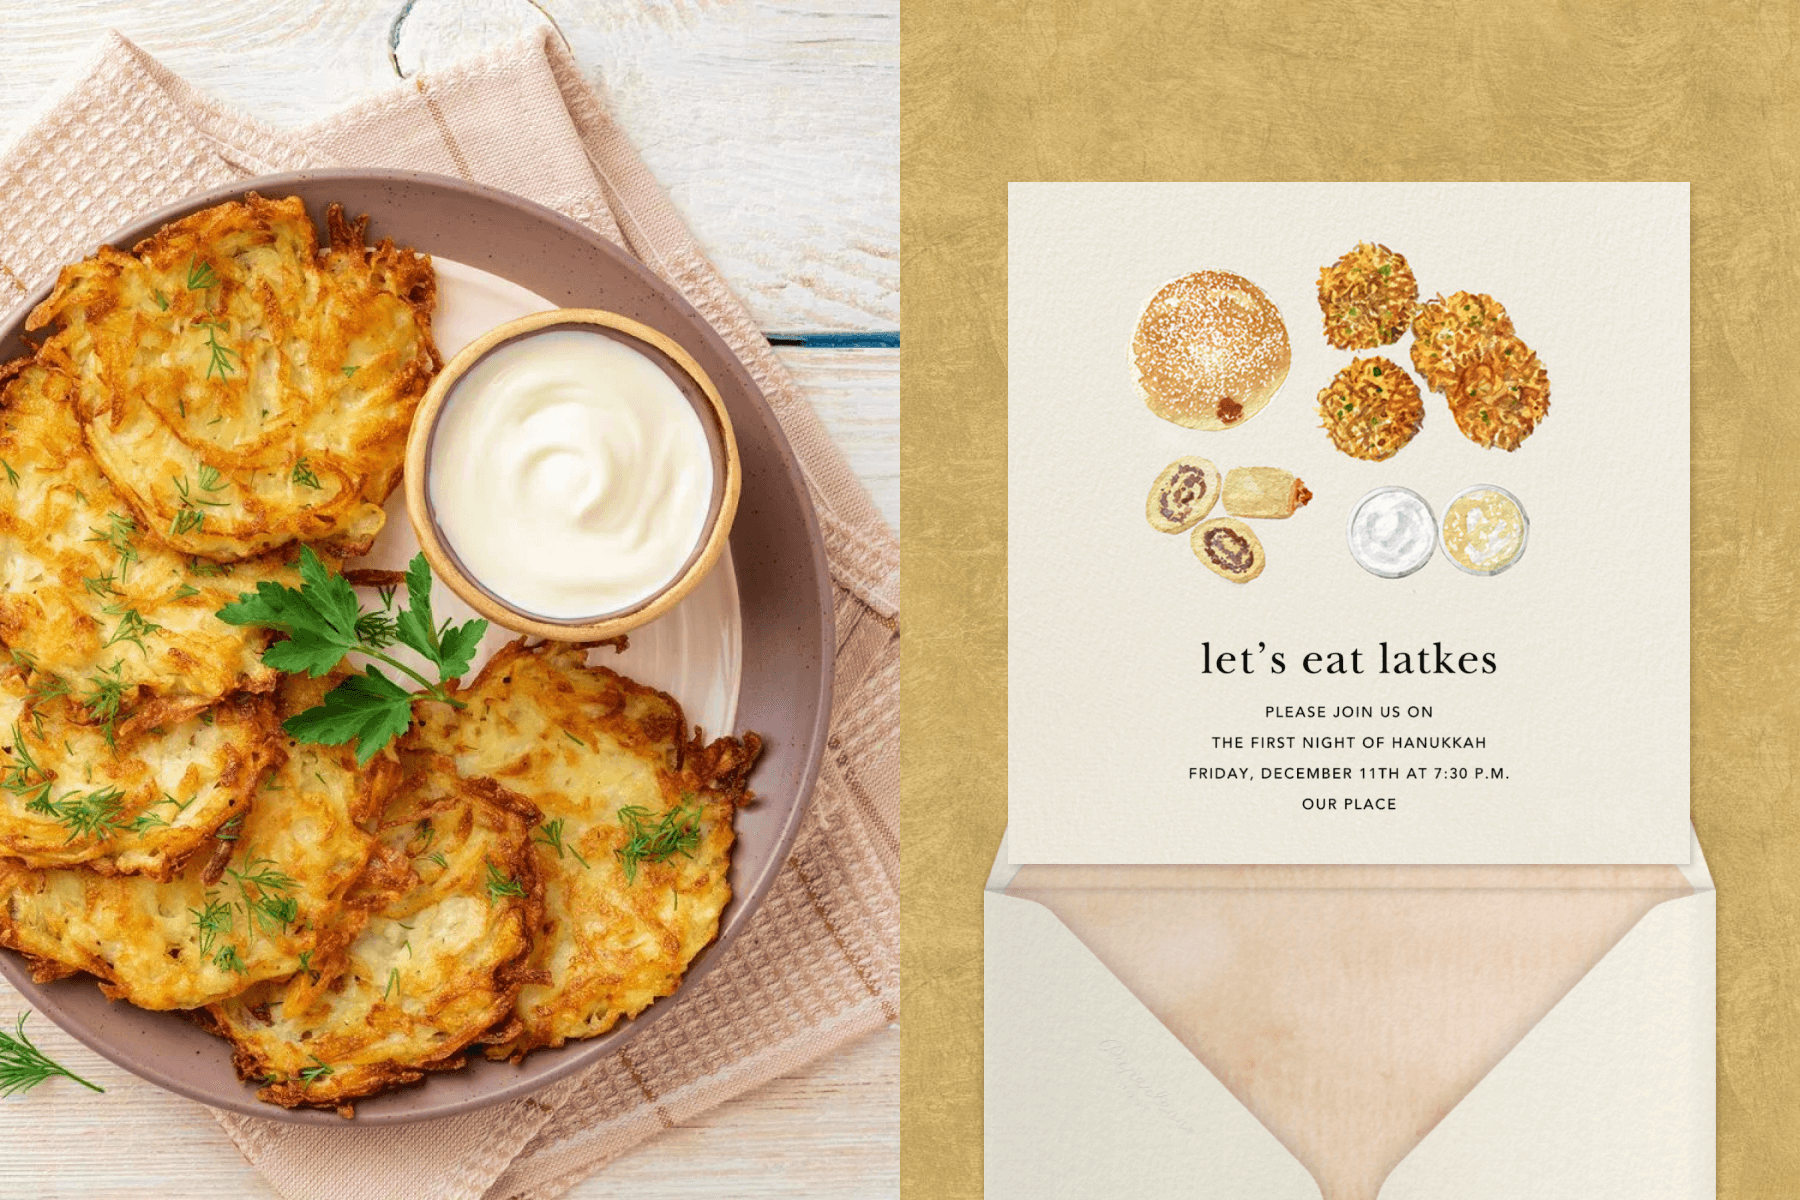 Left: Latkes and sour cream on a pink dish. Right: A Hanukkah invitation with latkes, jelly doughnuts, and dips above an envelope.